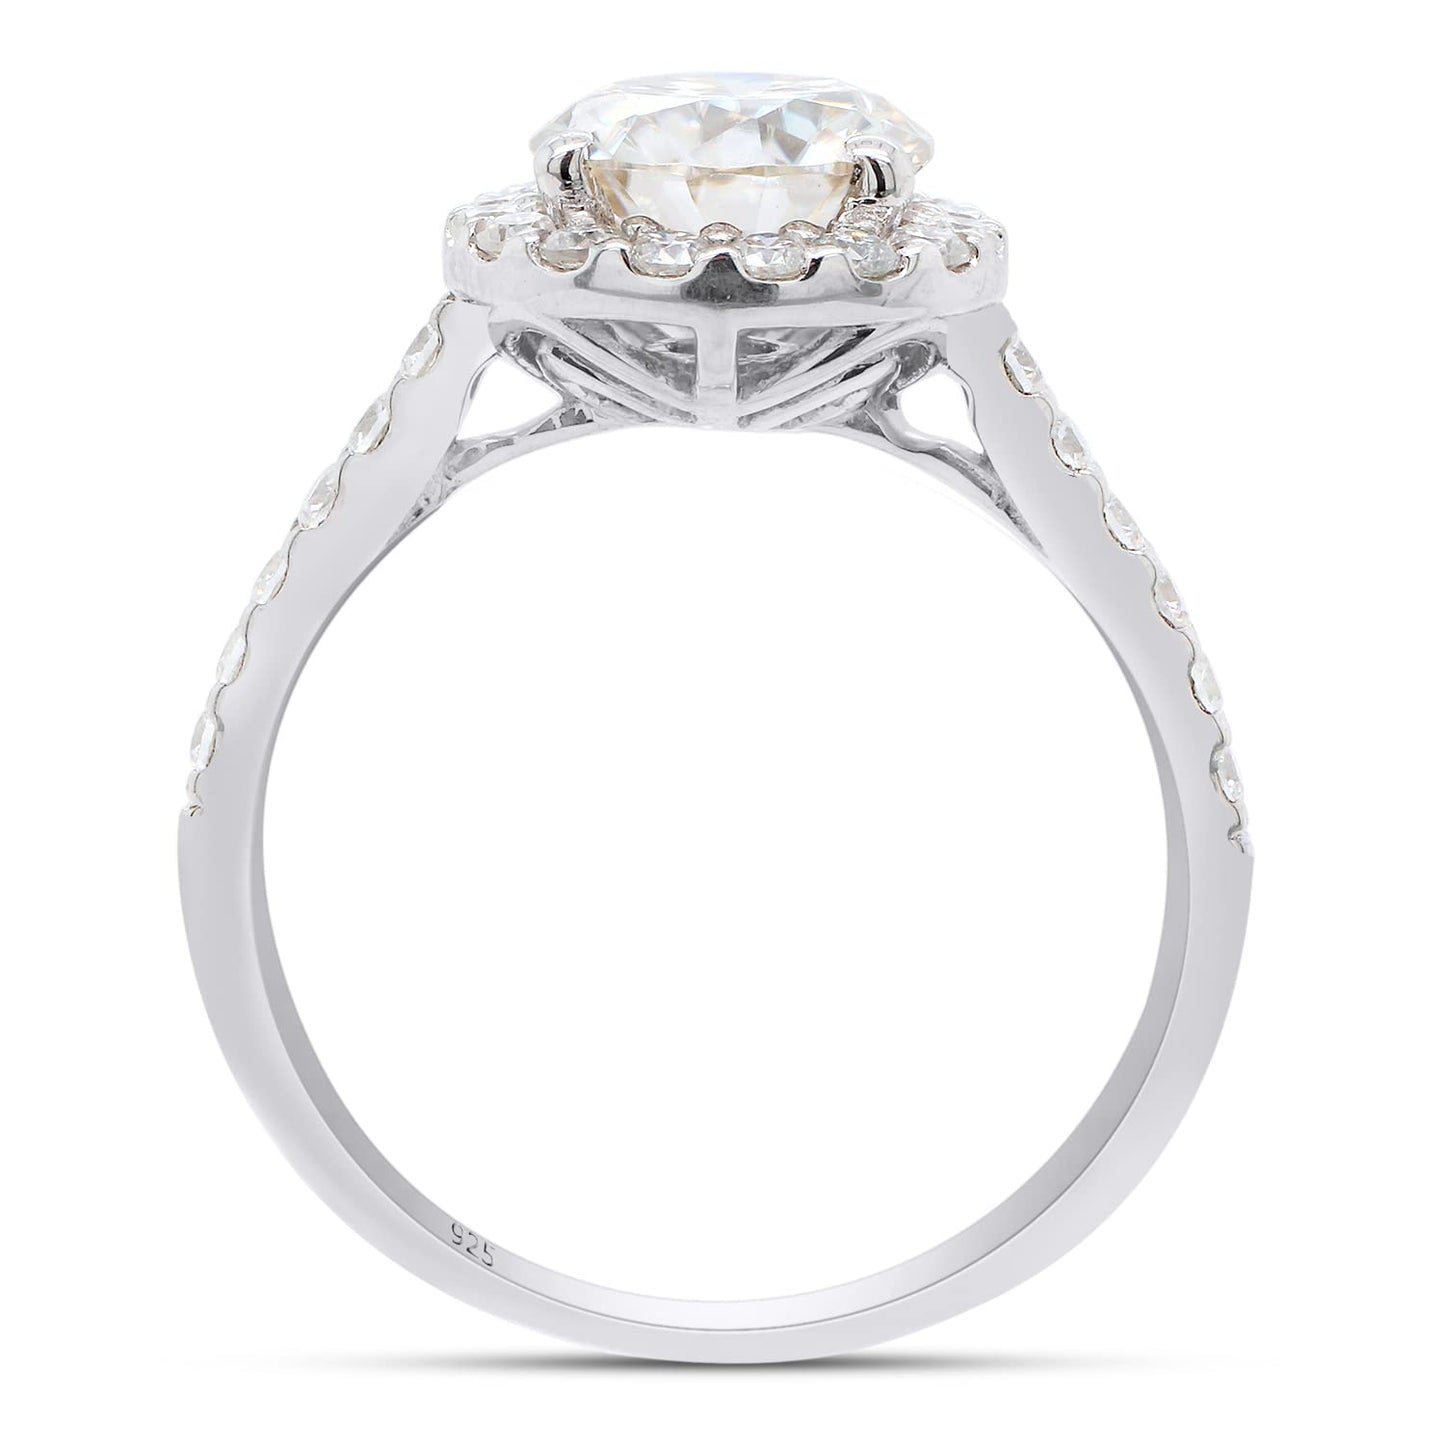 2.00 Carat Round Cut Lab Created Moissanite Diamond Halo Engagement Ring Jewelry for Women in 925 Sterling Silver